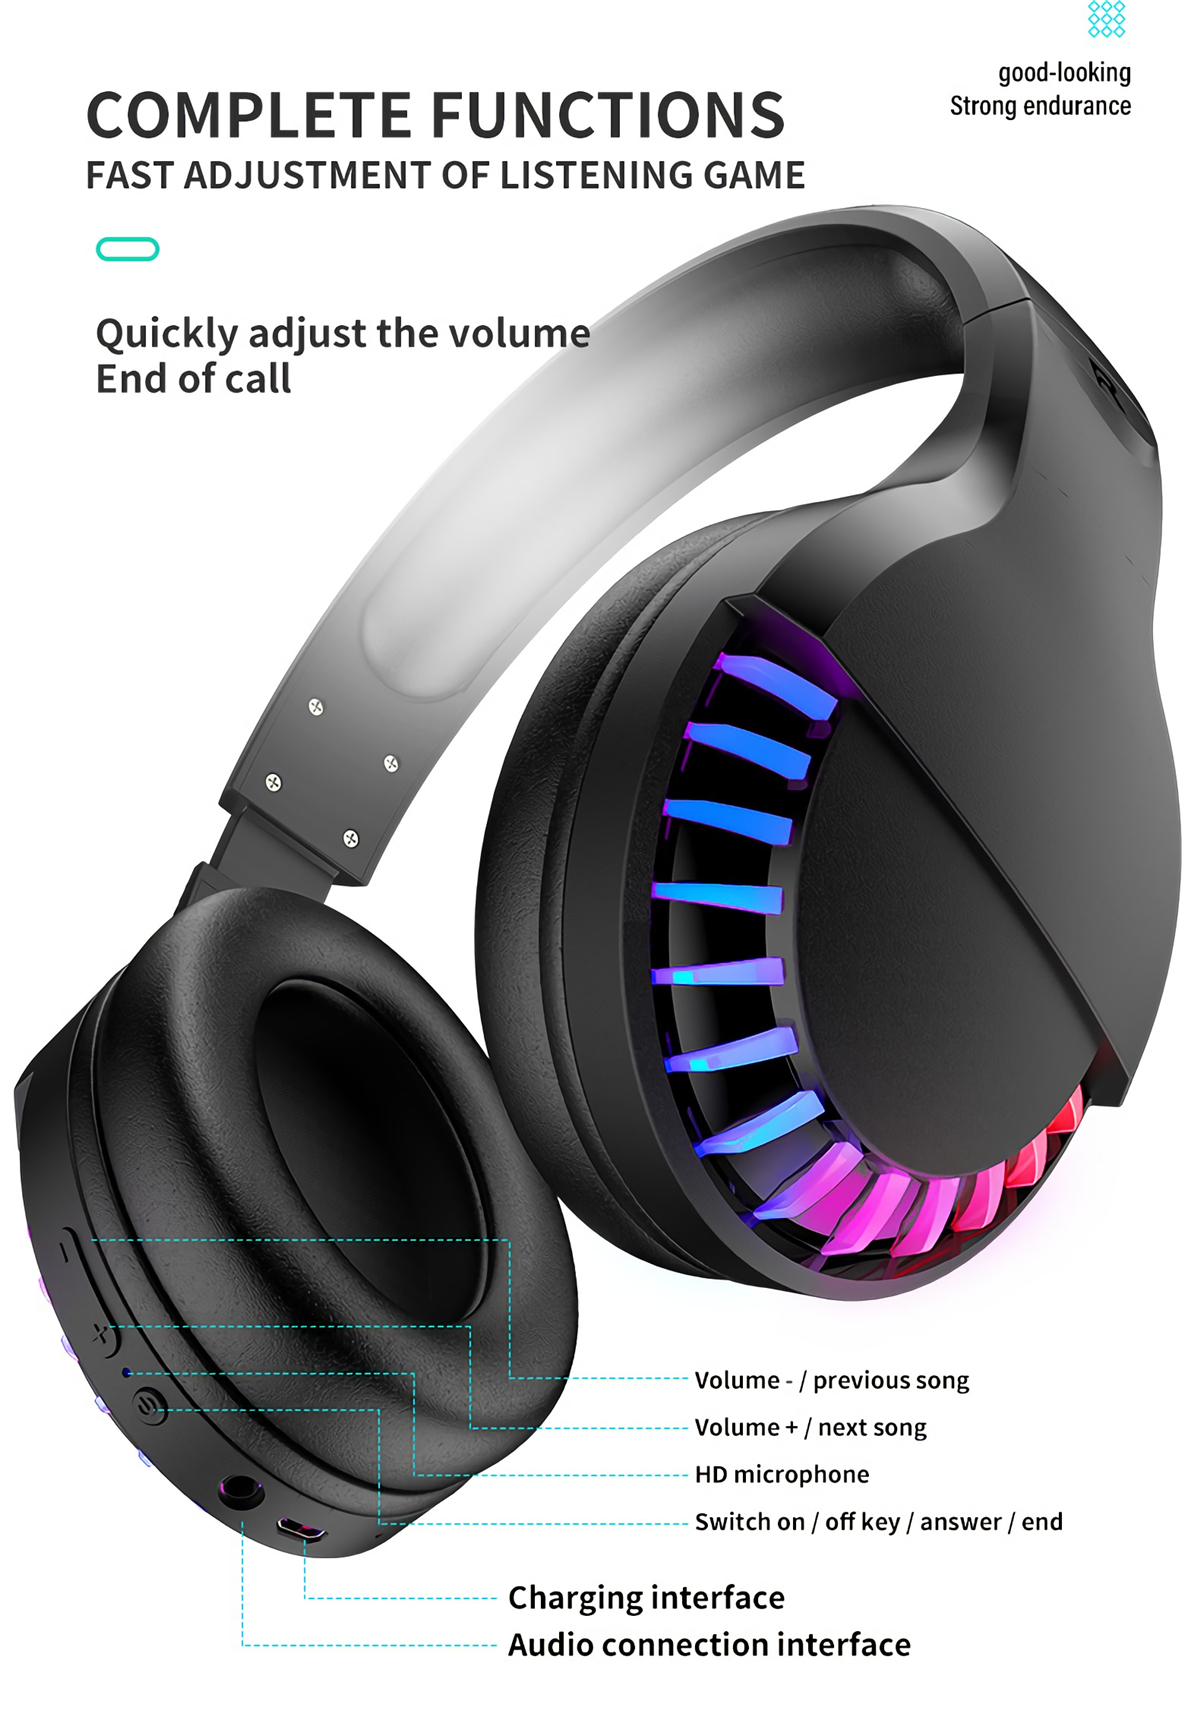 ZIYOULANG-SH33-bluetooth-Gaming-Headset-BT40Wired-9D-Stereo-Sound-RGB-Light-Game-Headphone-with-Mic--1820321-11